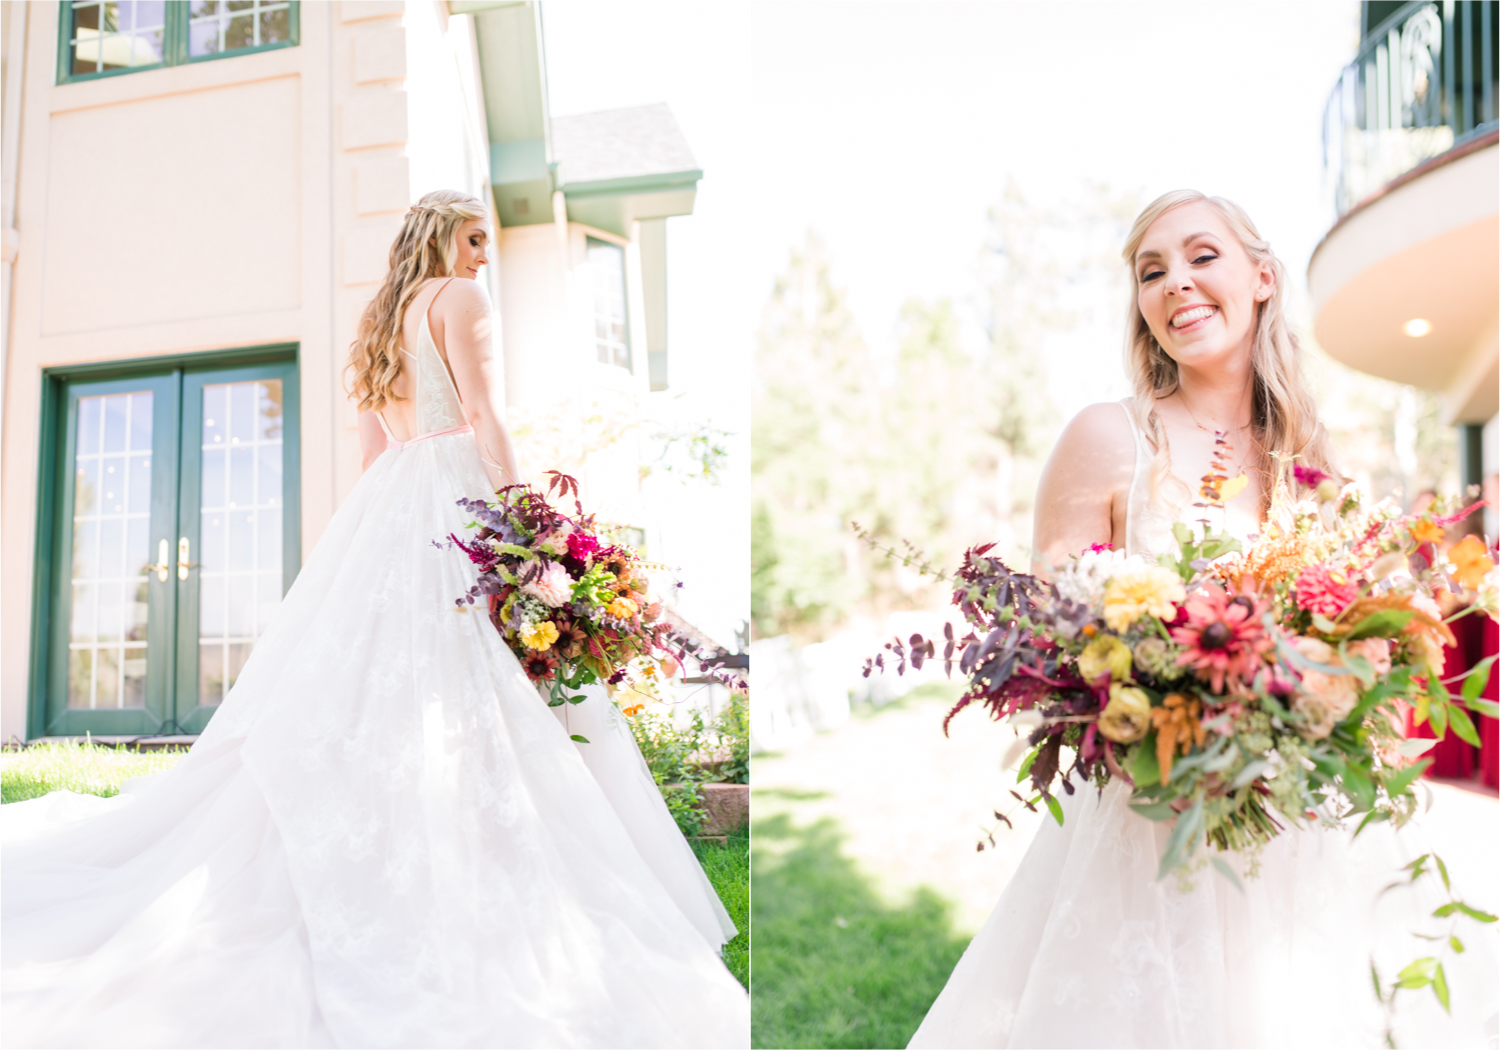 Romantic Whimsical Wedding at the Lionscrest Manor in Lyons, CO | Britni Girard Photography - Wedding Photo and Video Team | Rustic Fall Decor mixed in Burgundy, Blush, Gold and Sage | Wedding Dress from Anna Be Bridal by Hailey Paige | Hair and Makeup by Glam 5280 Chaundra Revier | Florals by Aflorae